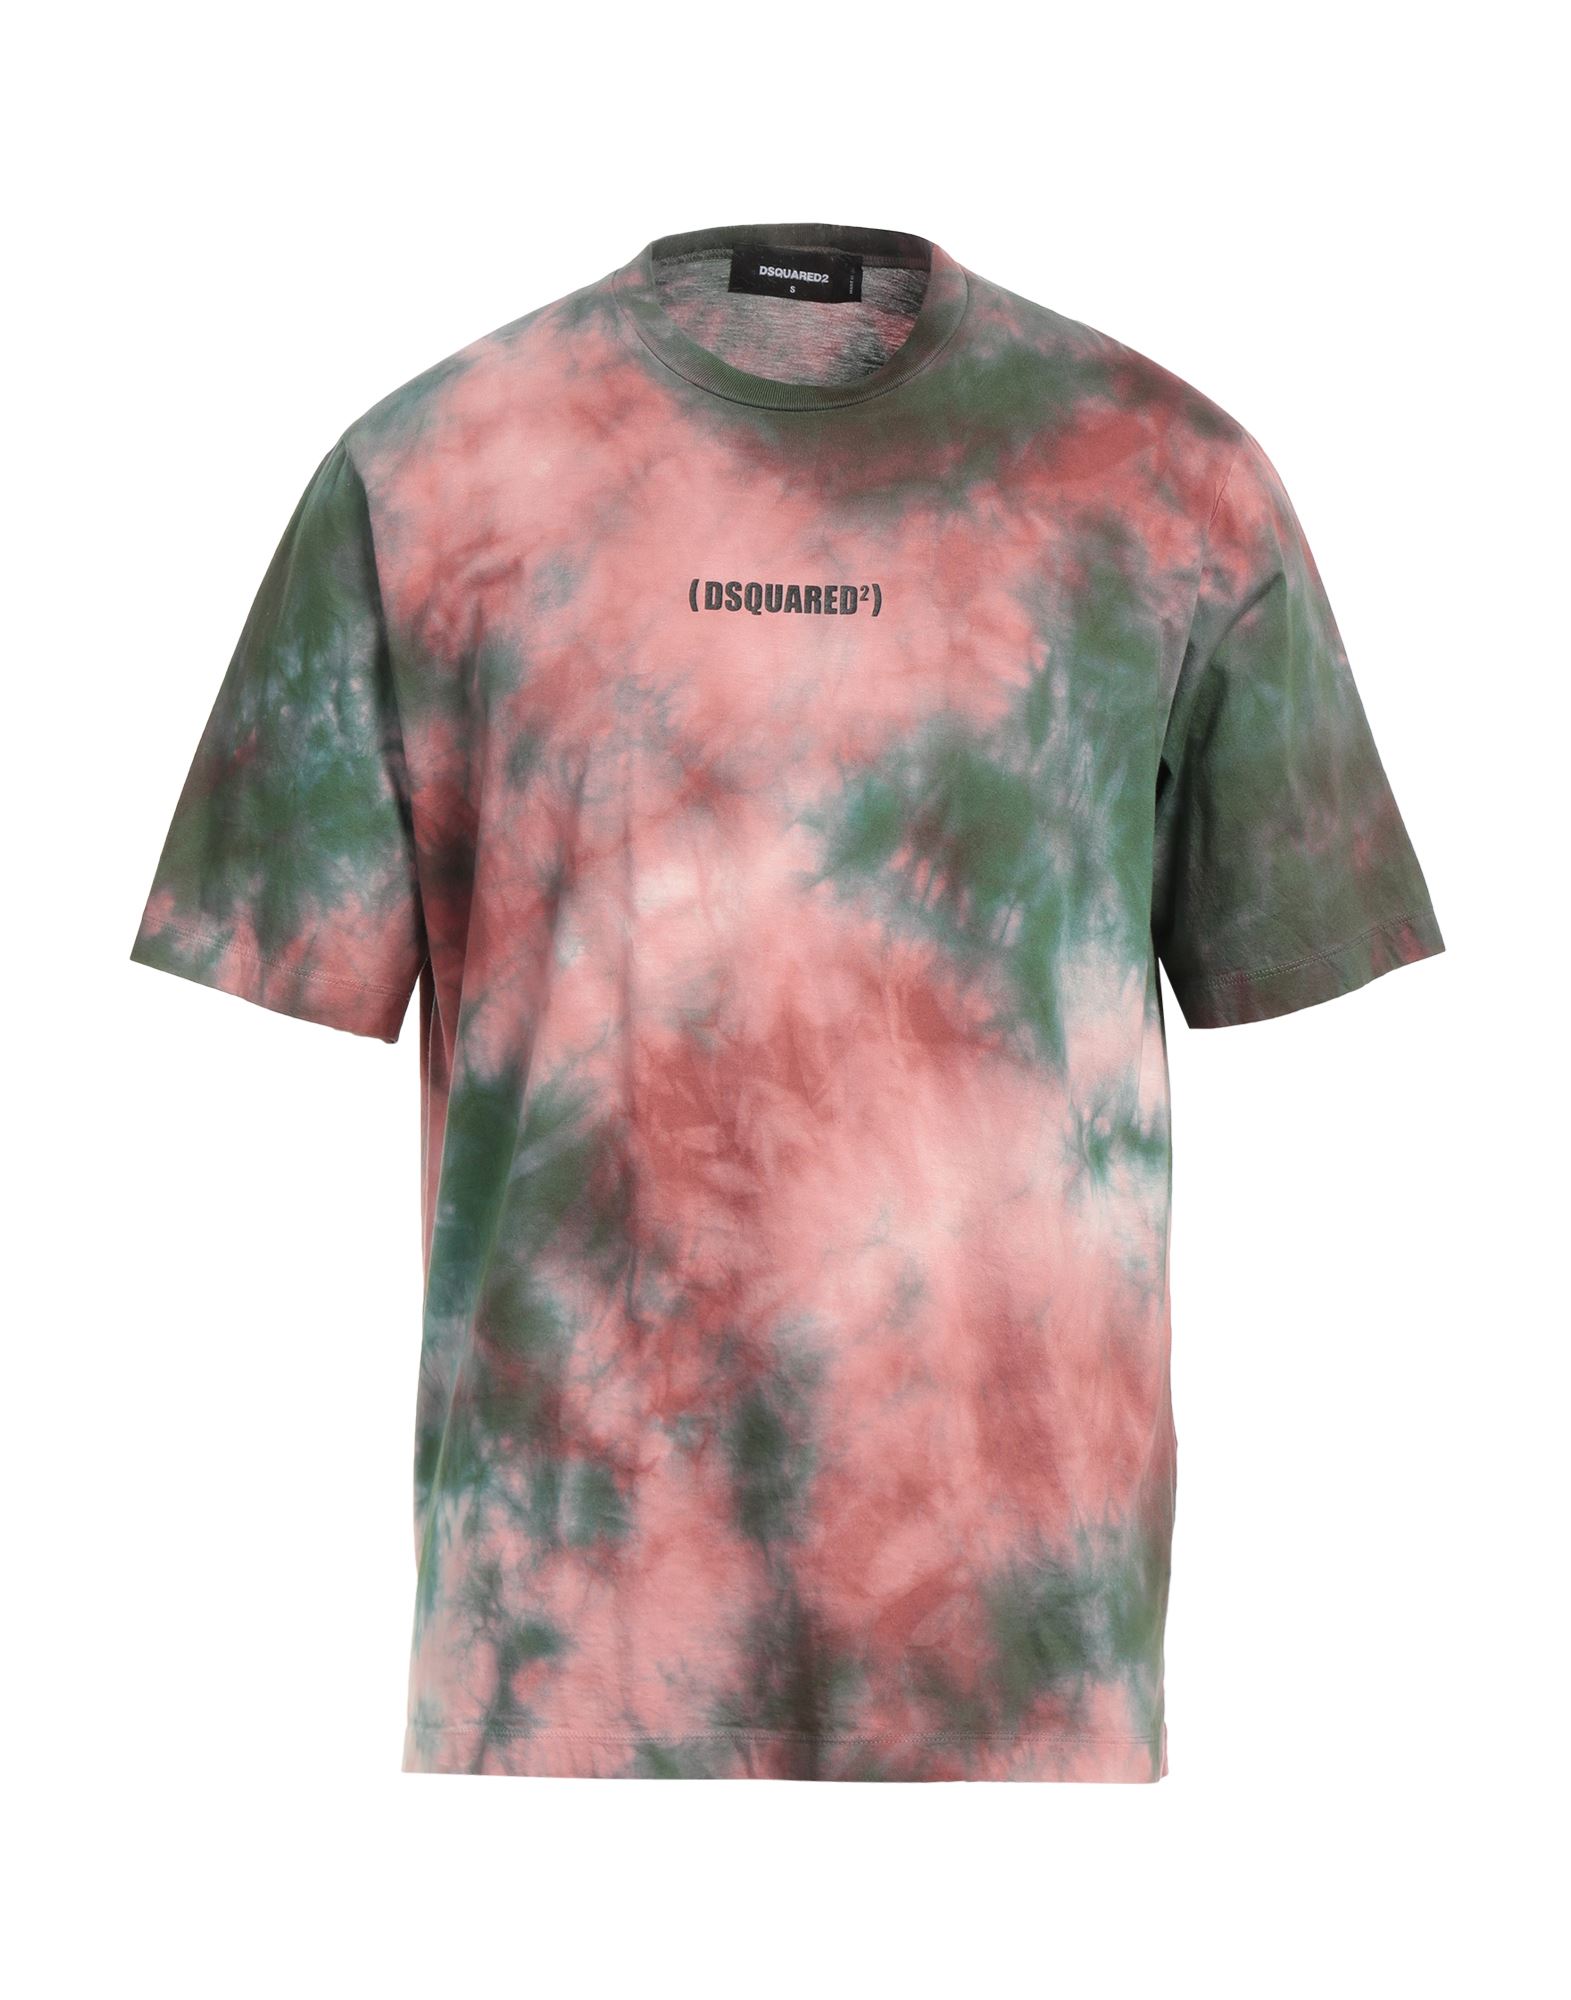 Dsquared2 T-shirts In Military Green